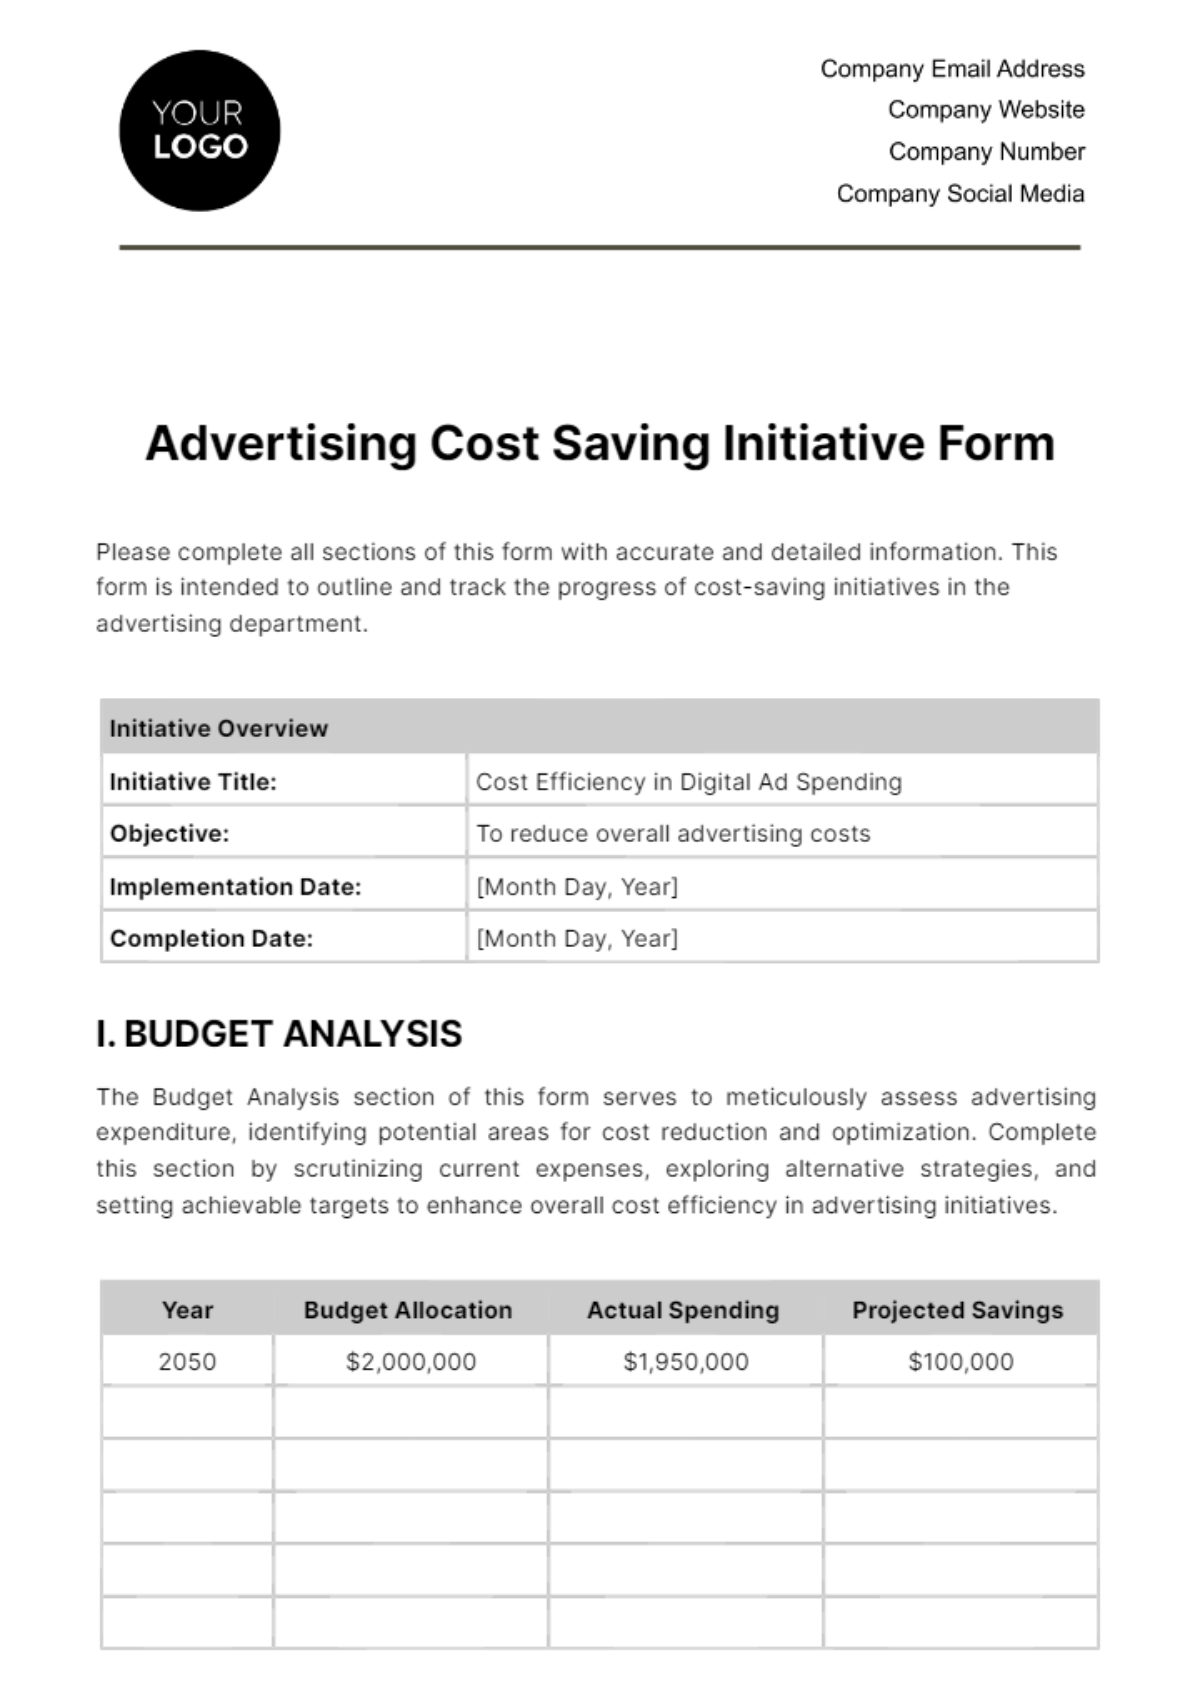 Advertising Cost Saving Initiative Form Template